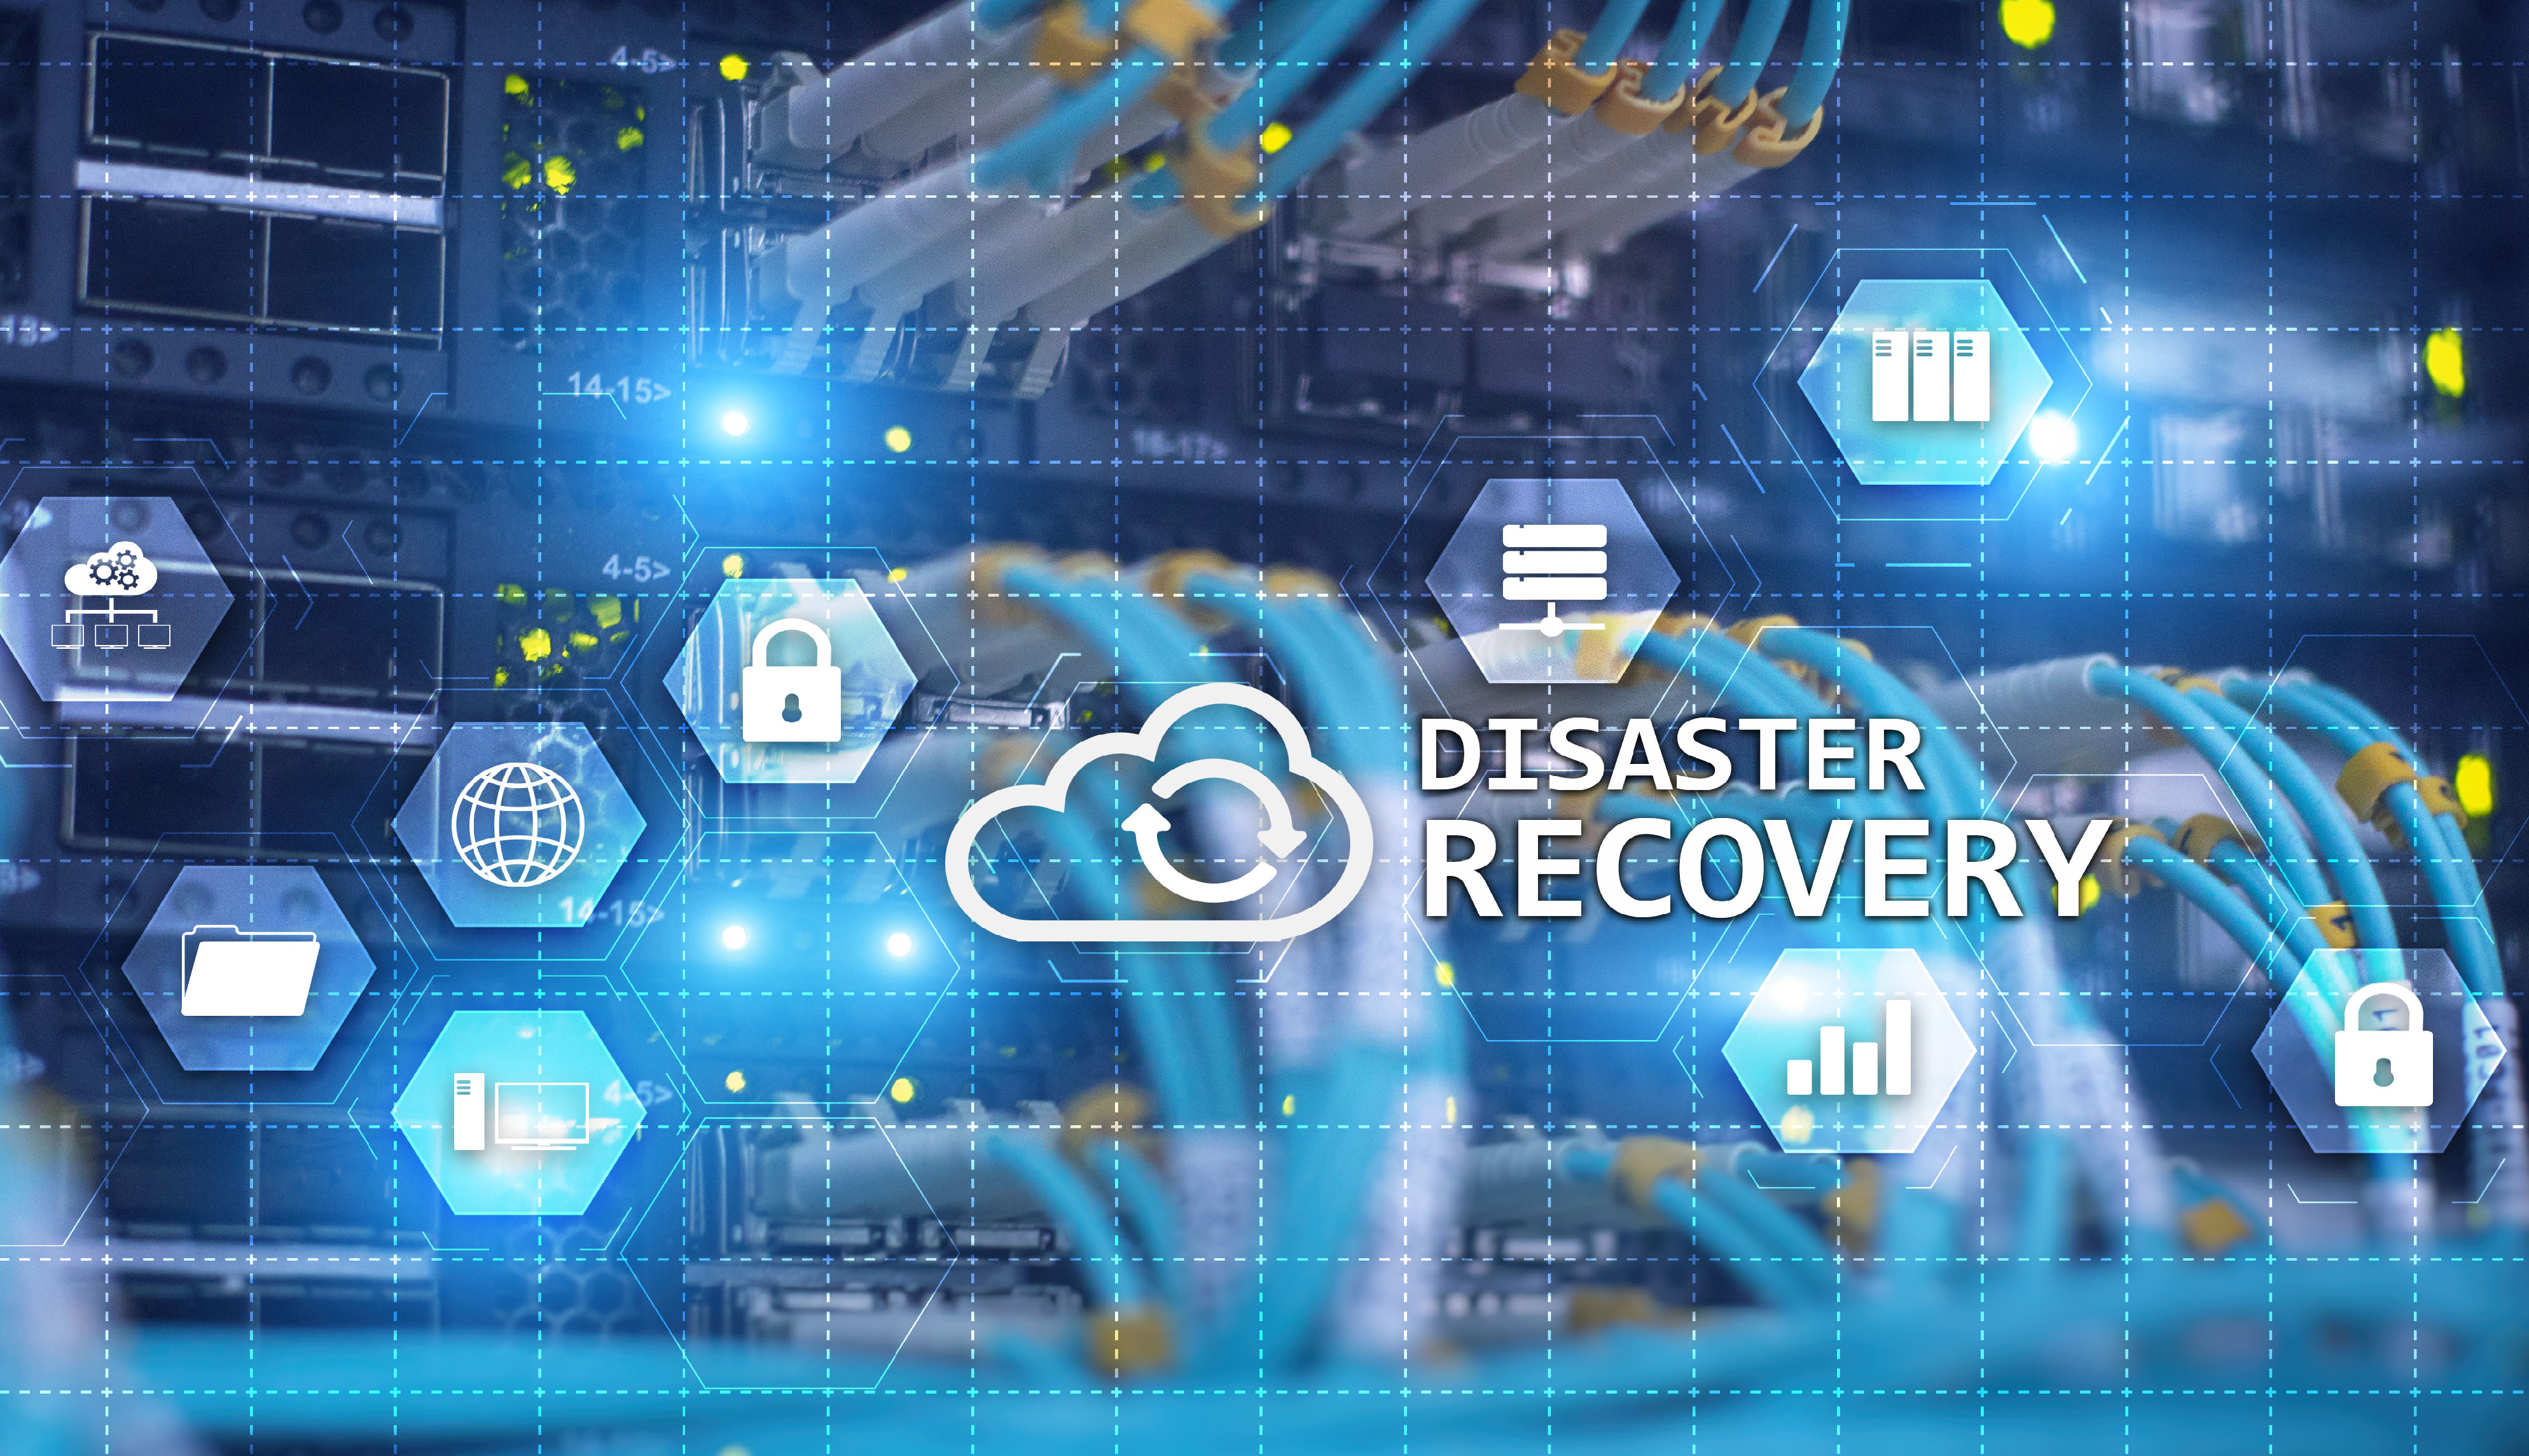 Disaster Recover - Our Client Hack Experience